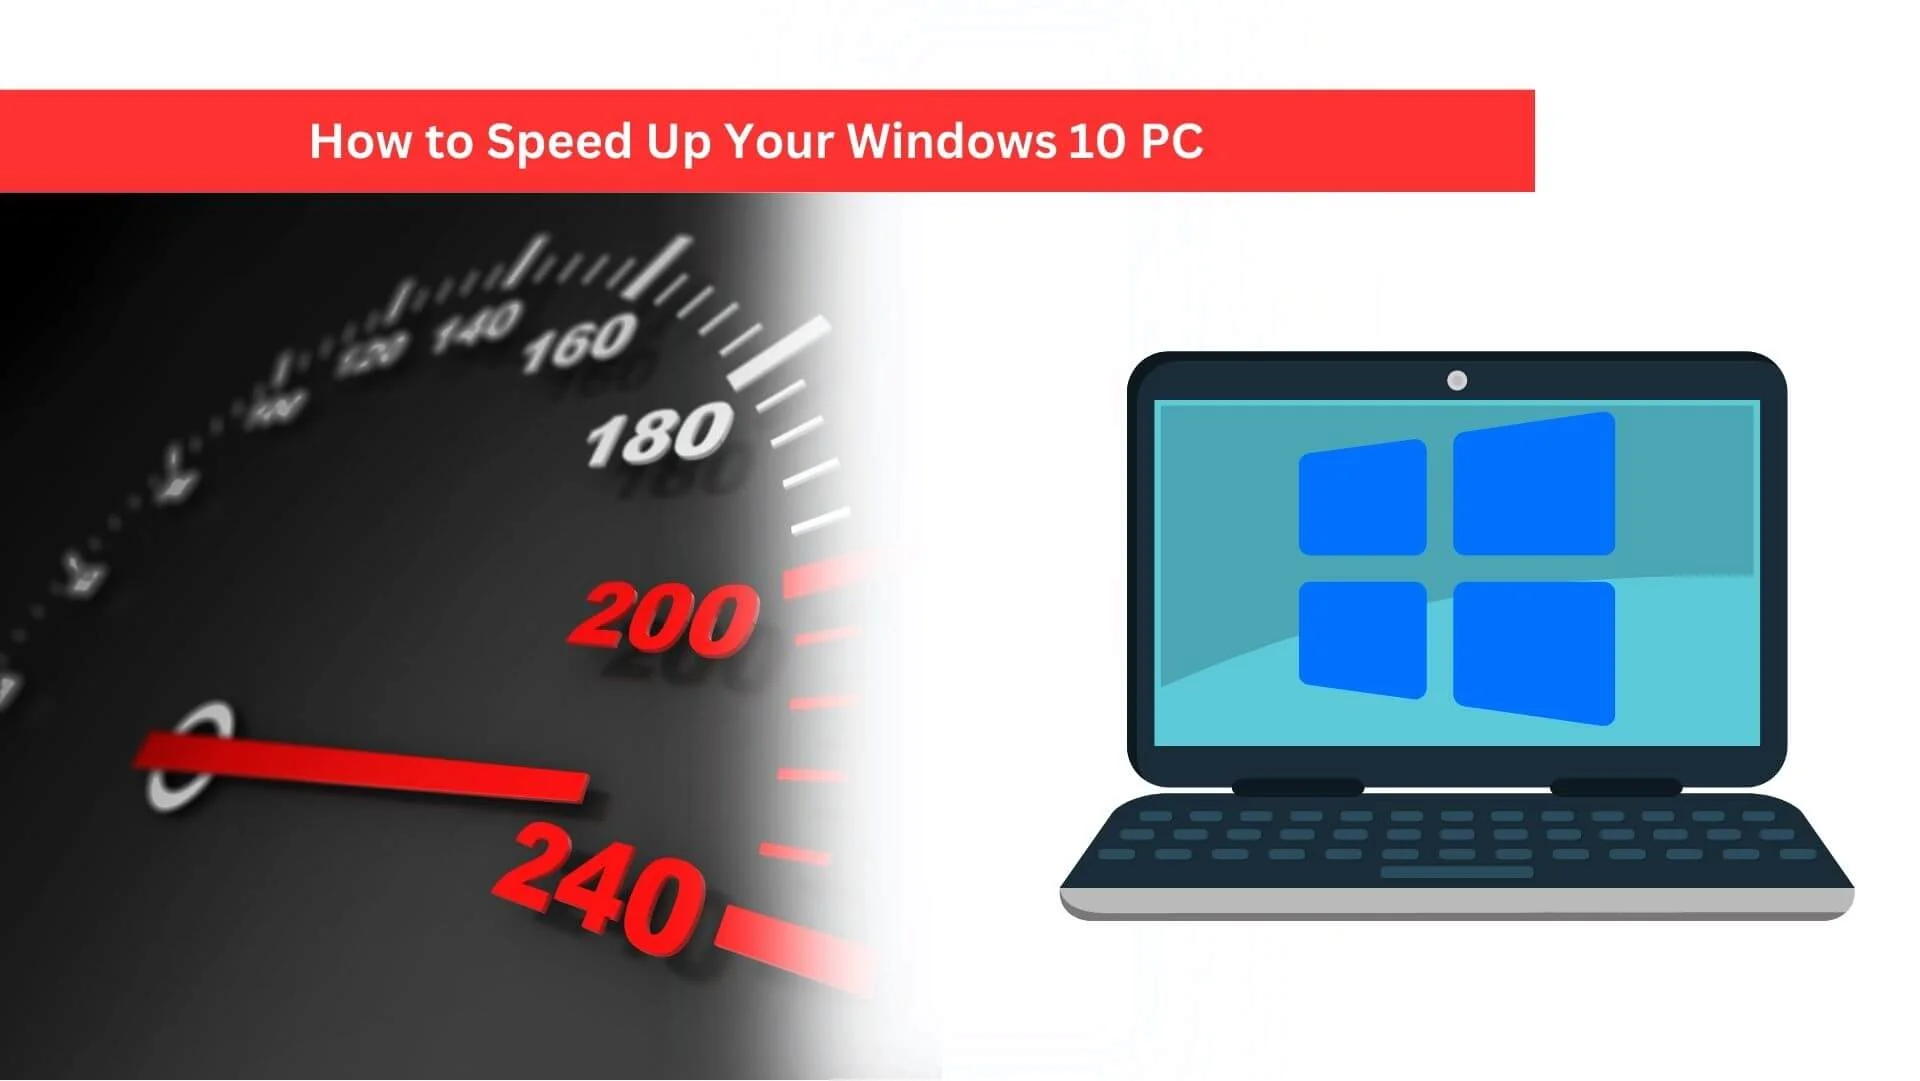 This is the image explaining "How to Speed Up Your Windows 10 PC"